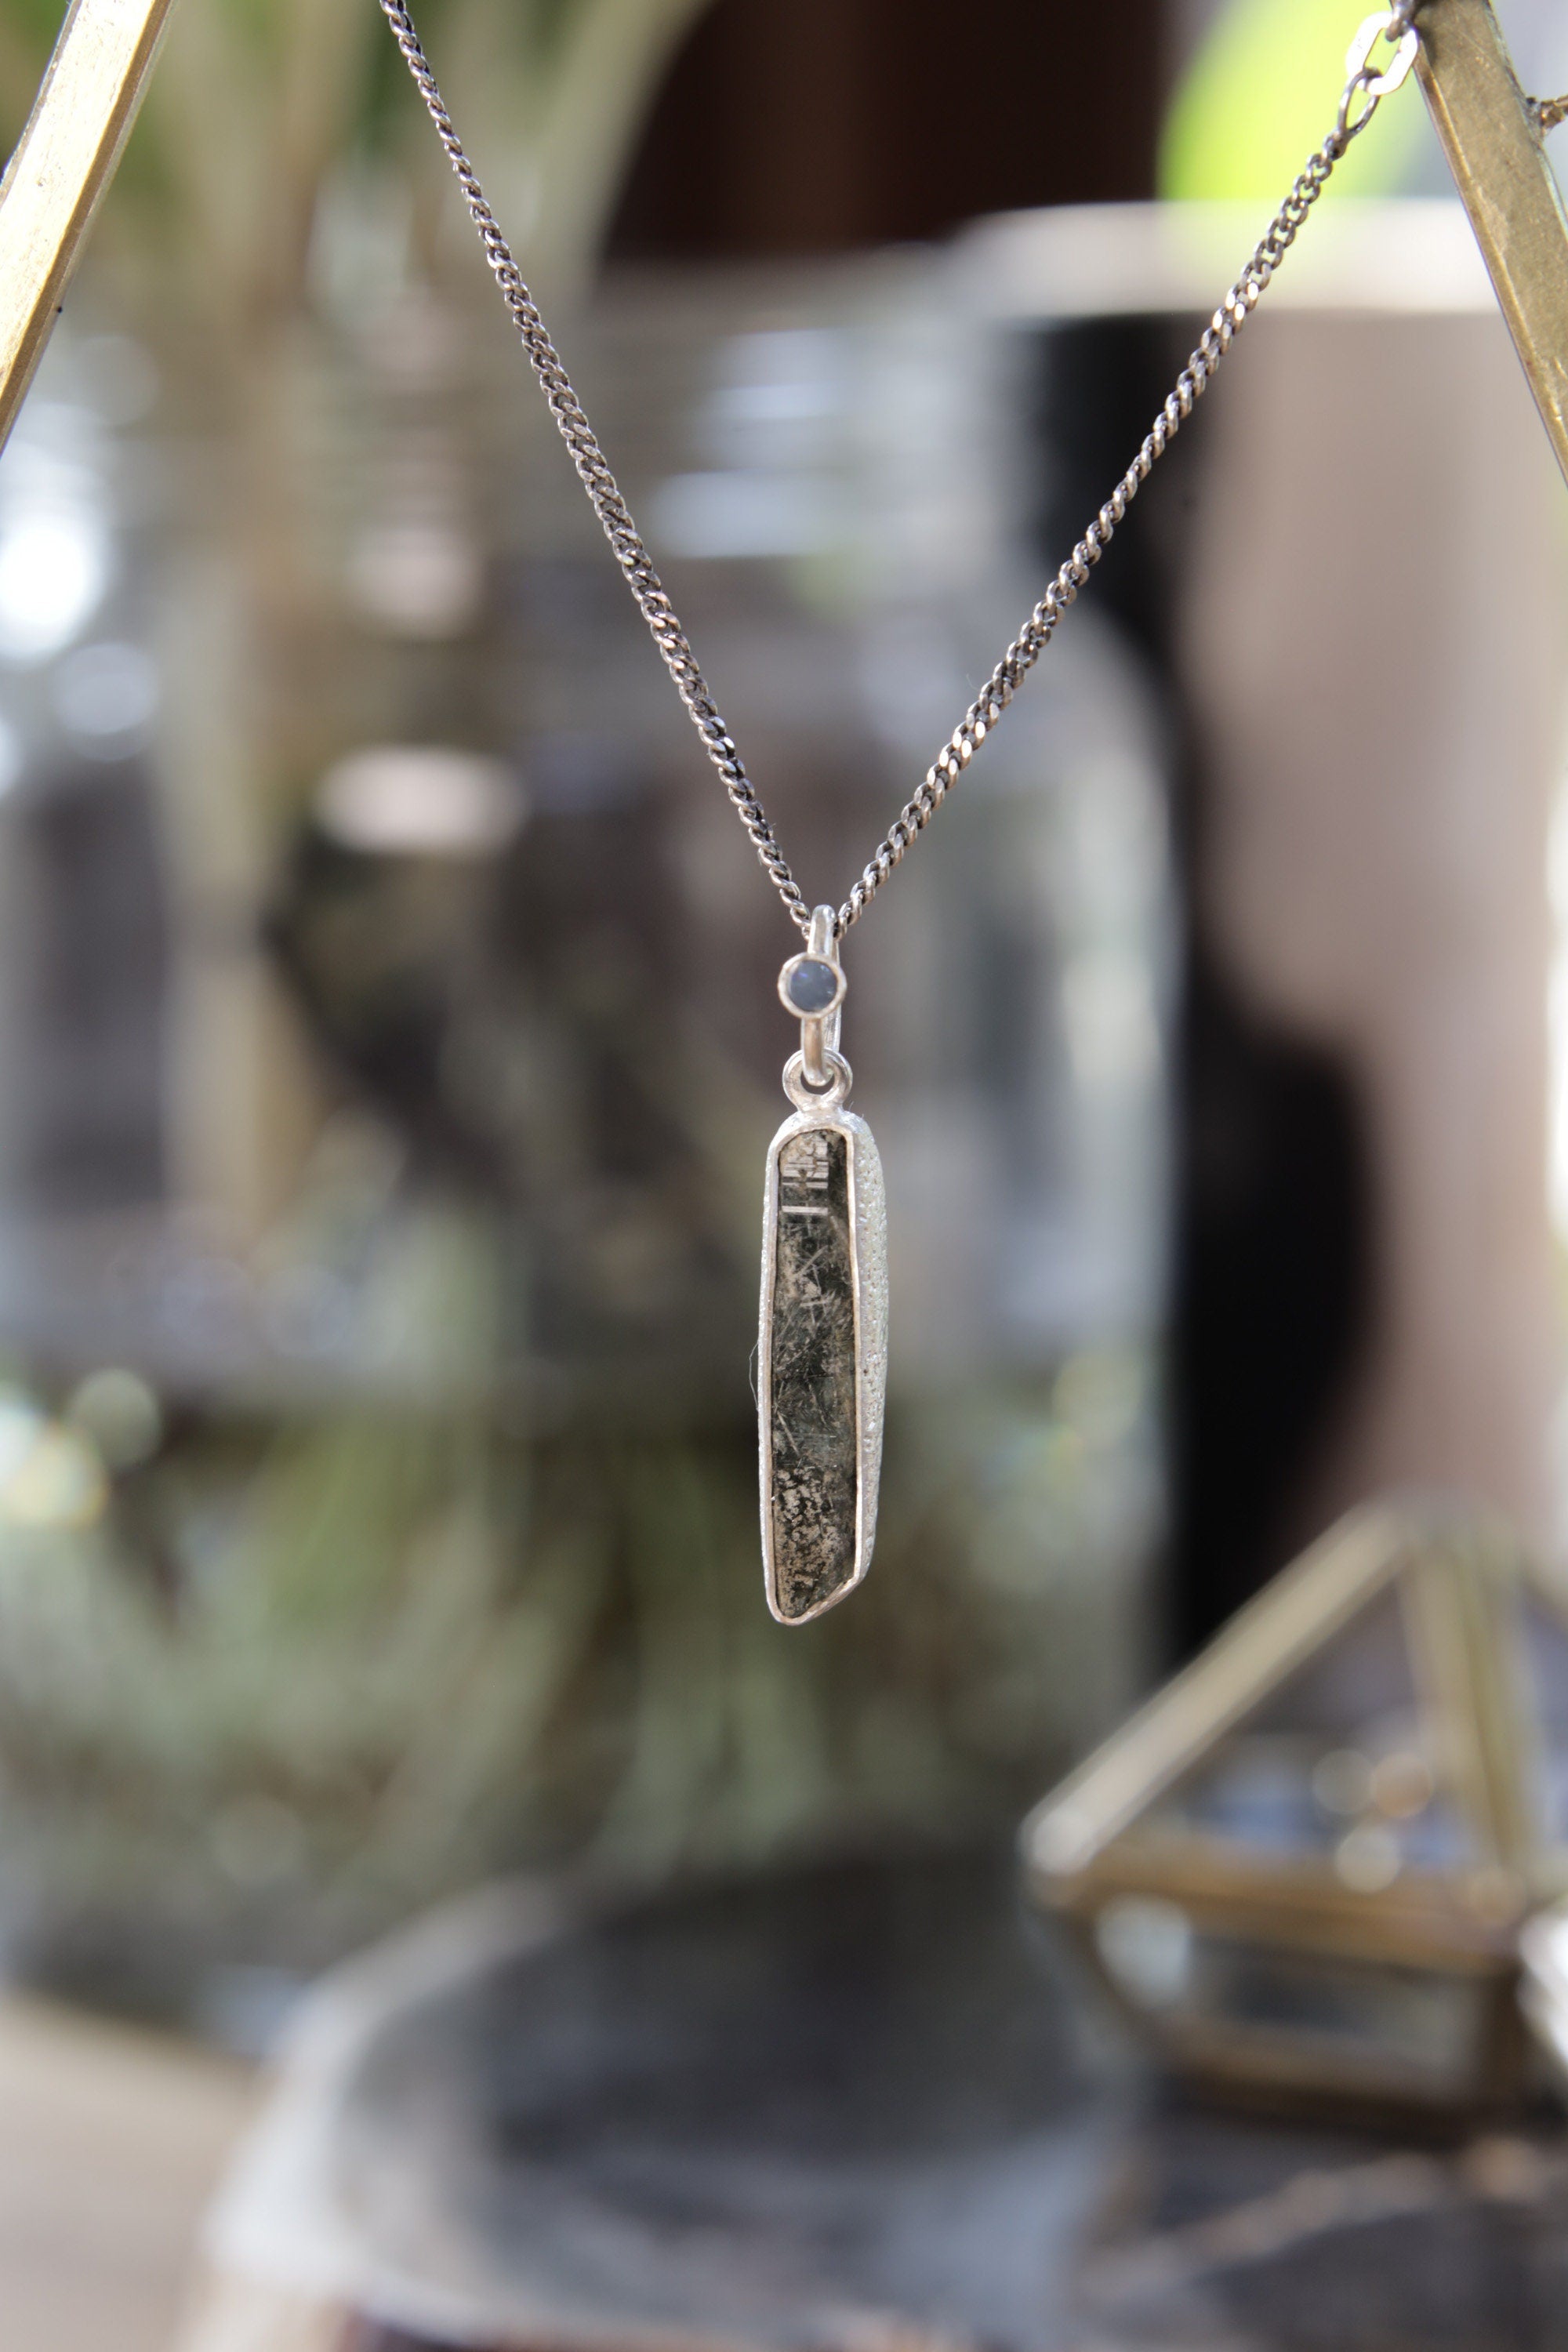 Luminous Peak: Sterling Silver Pendant with Himalayan Chlorite Quartz with White Rutile and Opal - High Shine & Sand Textured - NO/01